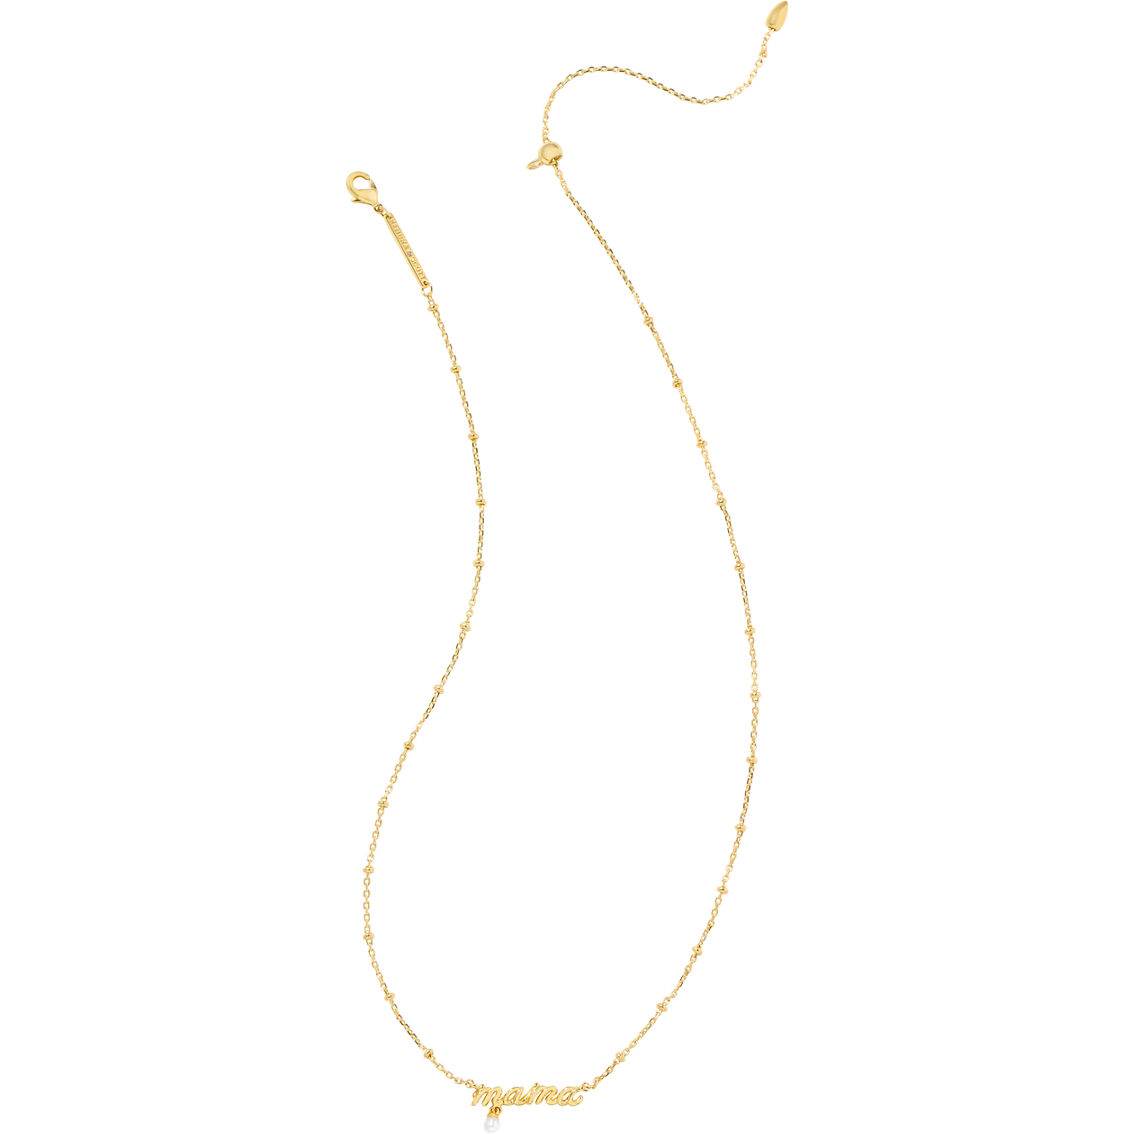 Kendra Scott Gold White Pearl Mama Script Necklace 19 in. - Image 2 of 2